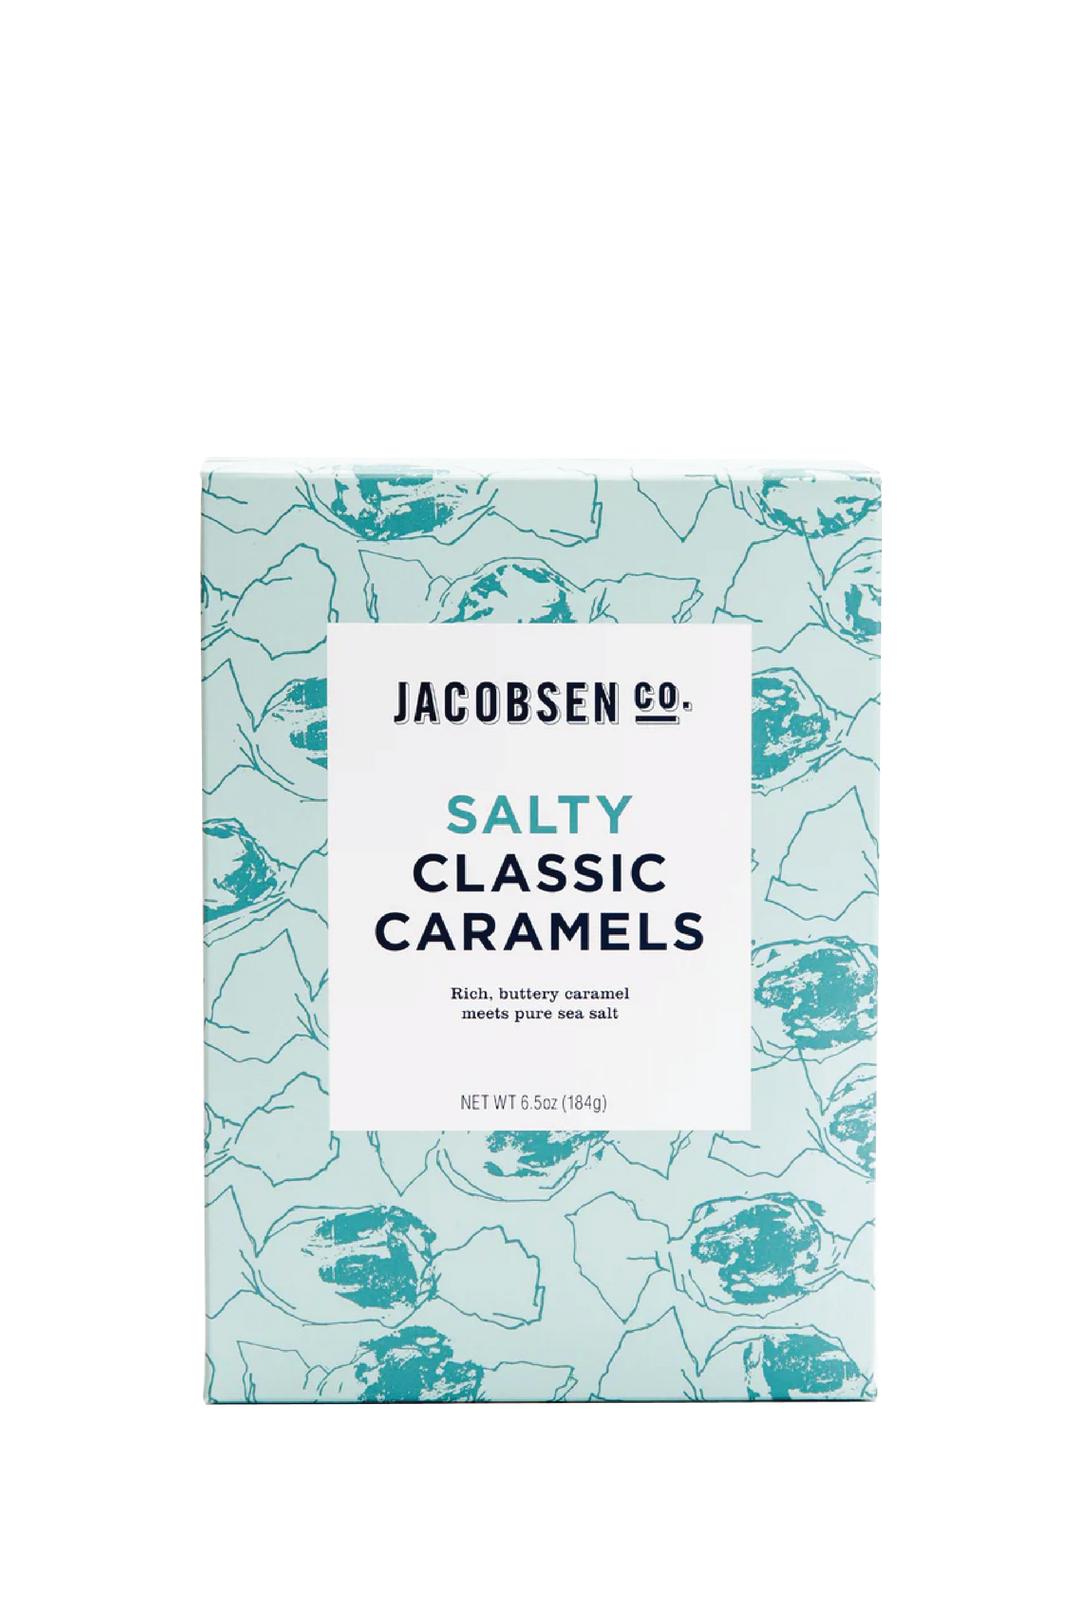 A Photo of Jacobsen Salt Co's Salty Classic Caramels in a pale blue box with stylistic renderings of caramels in wax paper wrappers in teal. Box says "Rich, buttery caramel meets pure sea salt." White background.